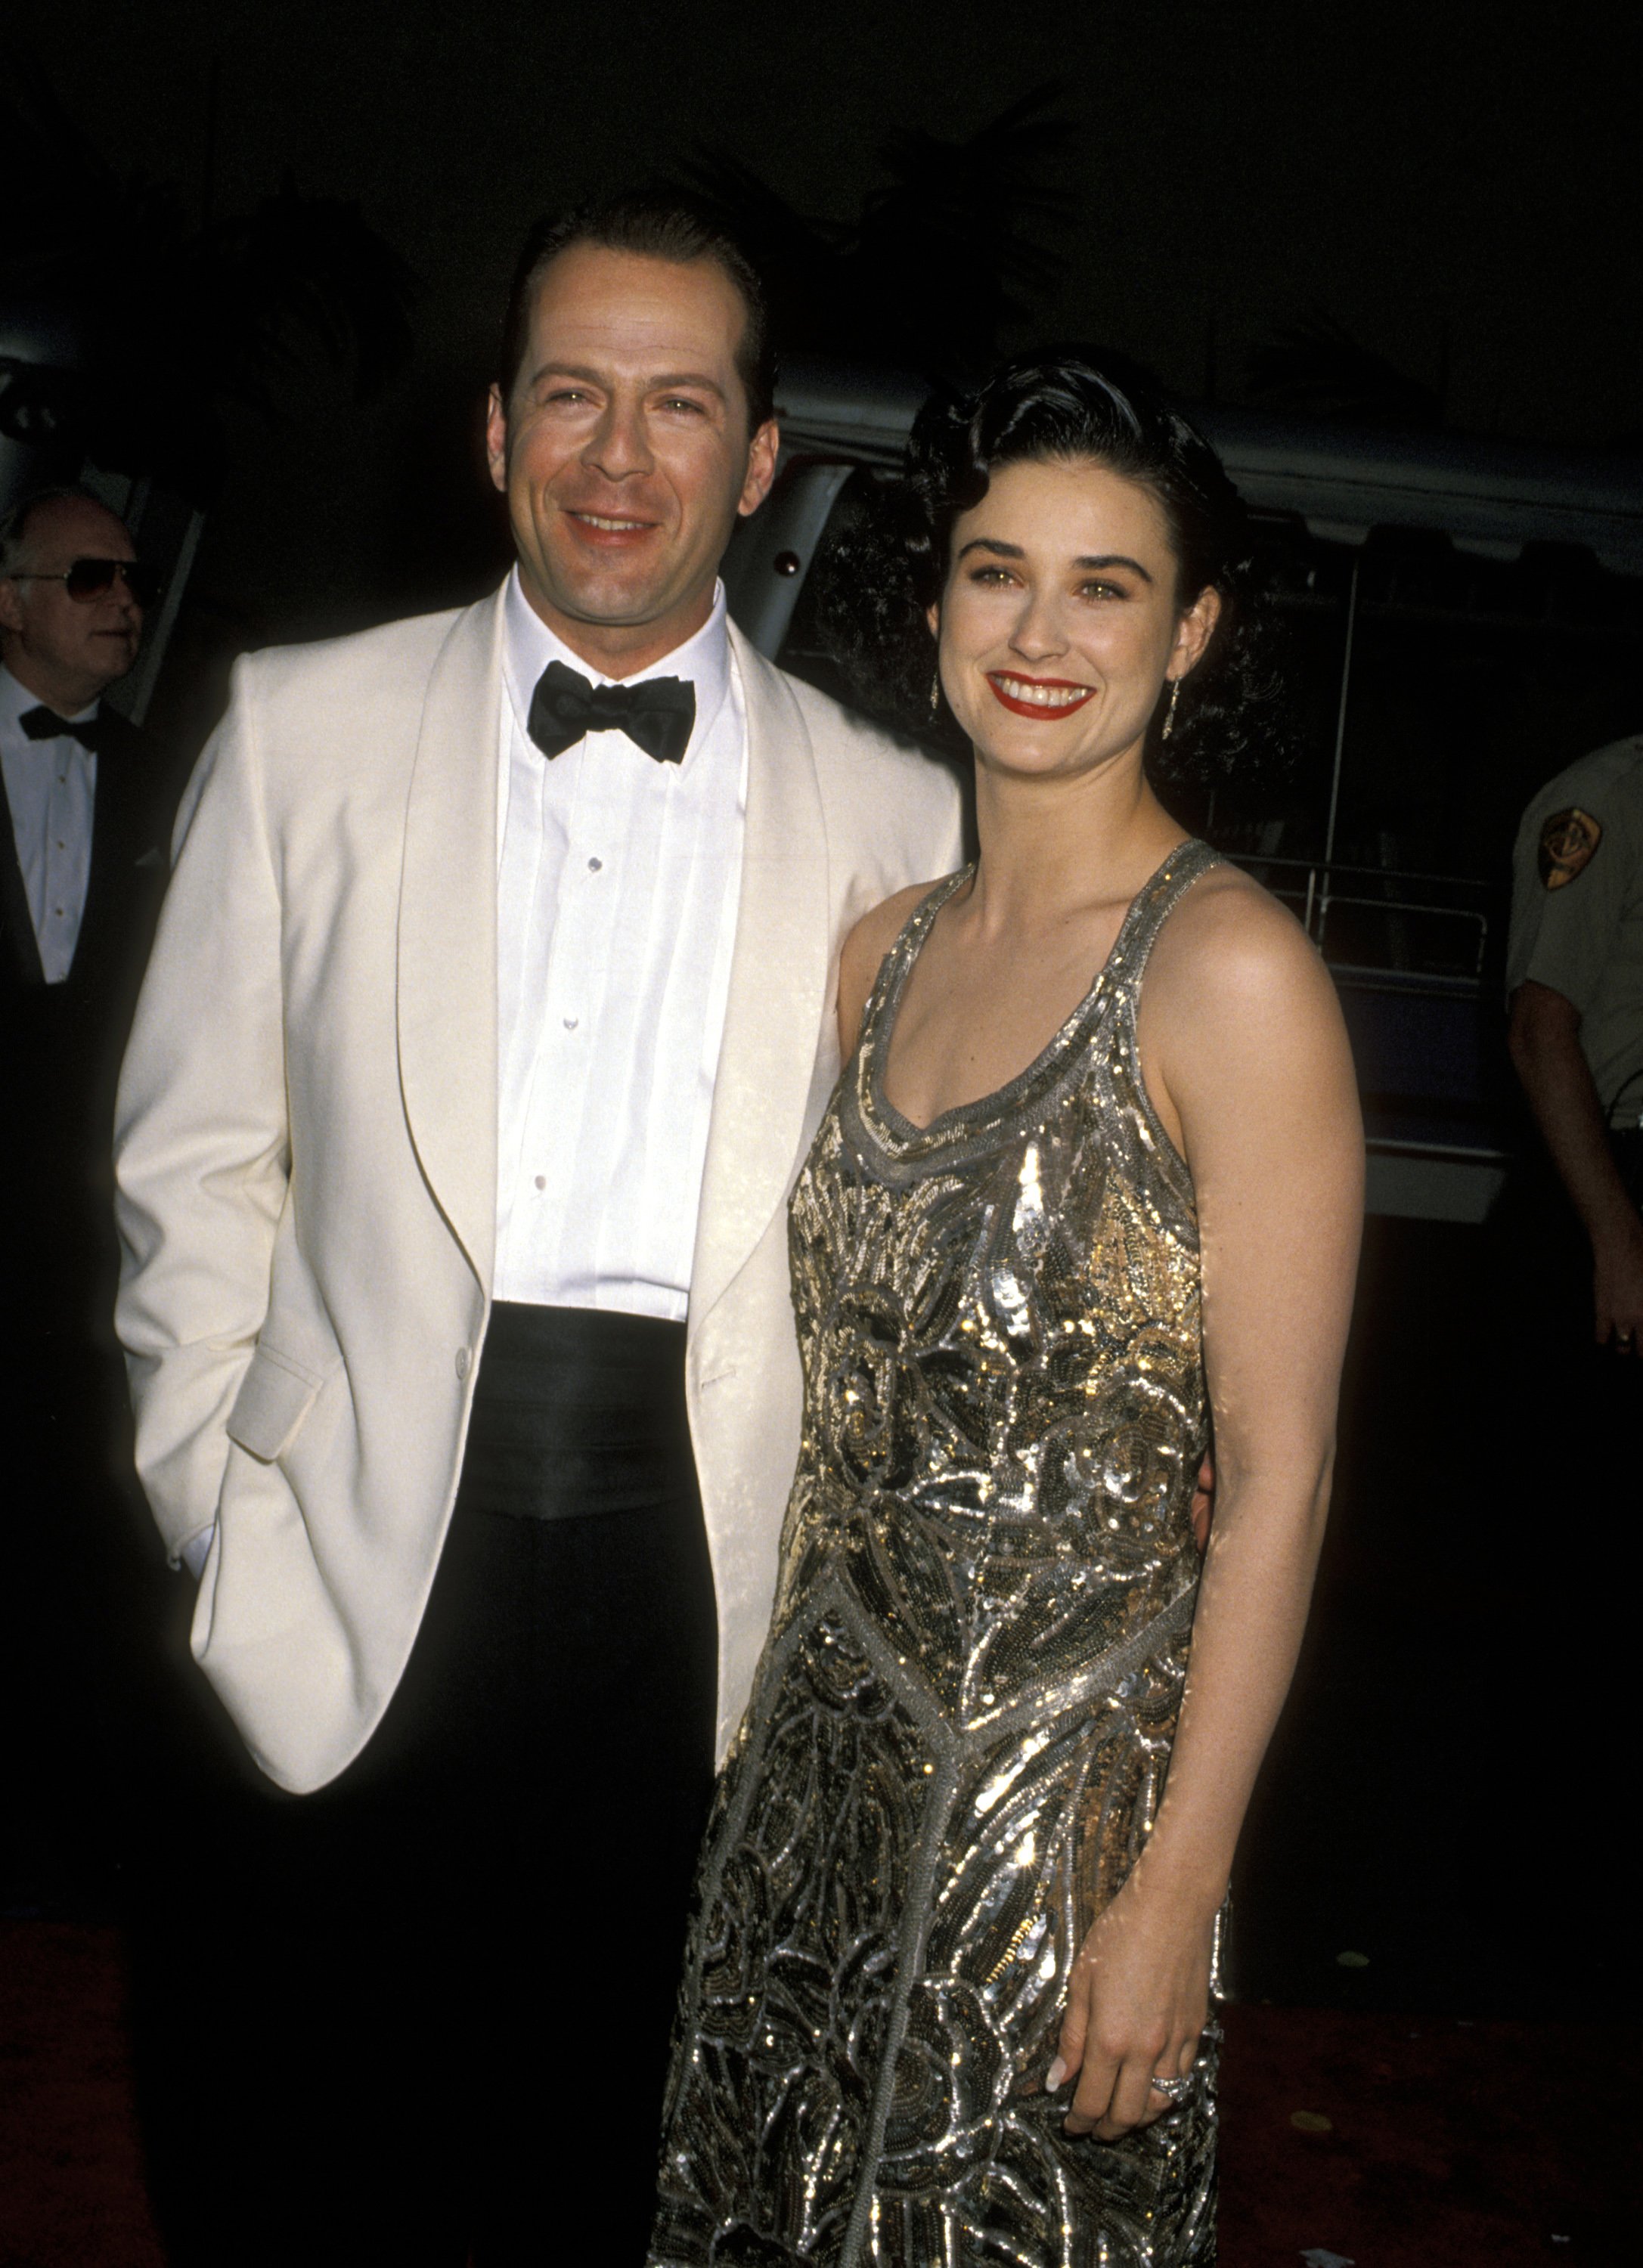 Bruce Willis and Demi Moore at the "Celebration of Tradition" A Gala Event Gathering Warner Bros. Stars at Warner Bros. Studios on June 2, 1990 in Burbank, California. | Source: Getty Images